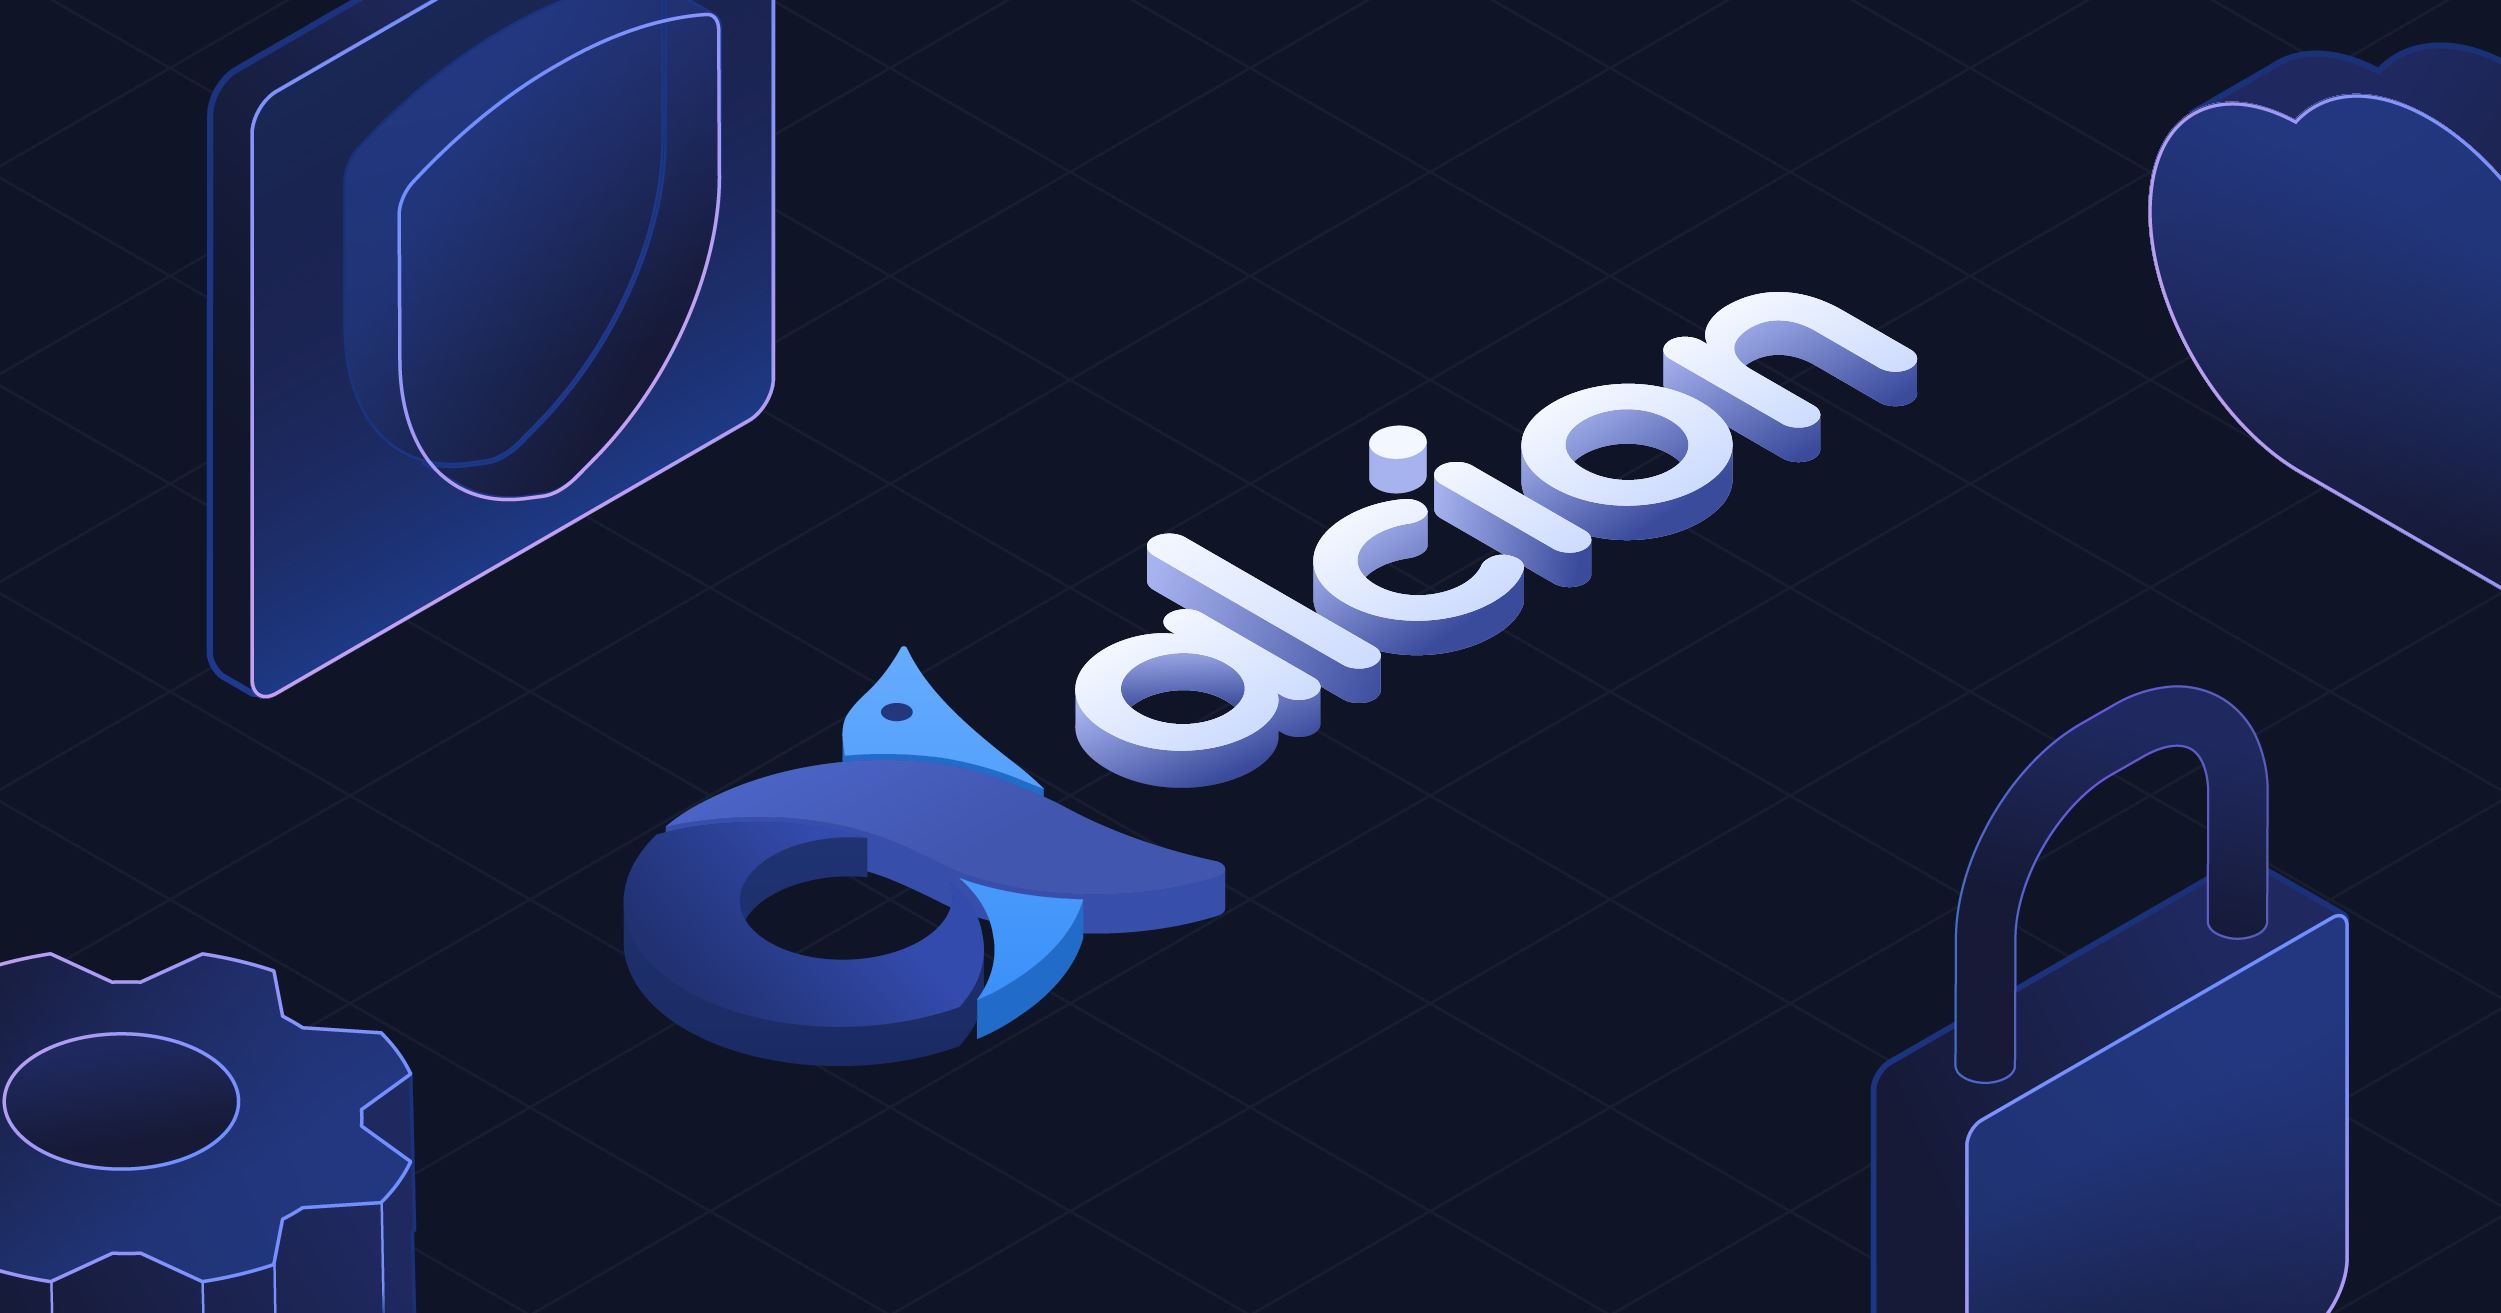 Alcion Raises $21 Million In Series A Funding To Expand Cloud Data Security Solutions